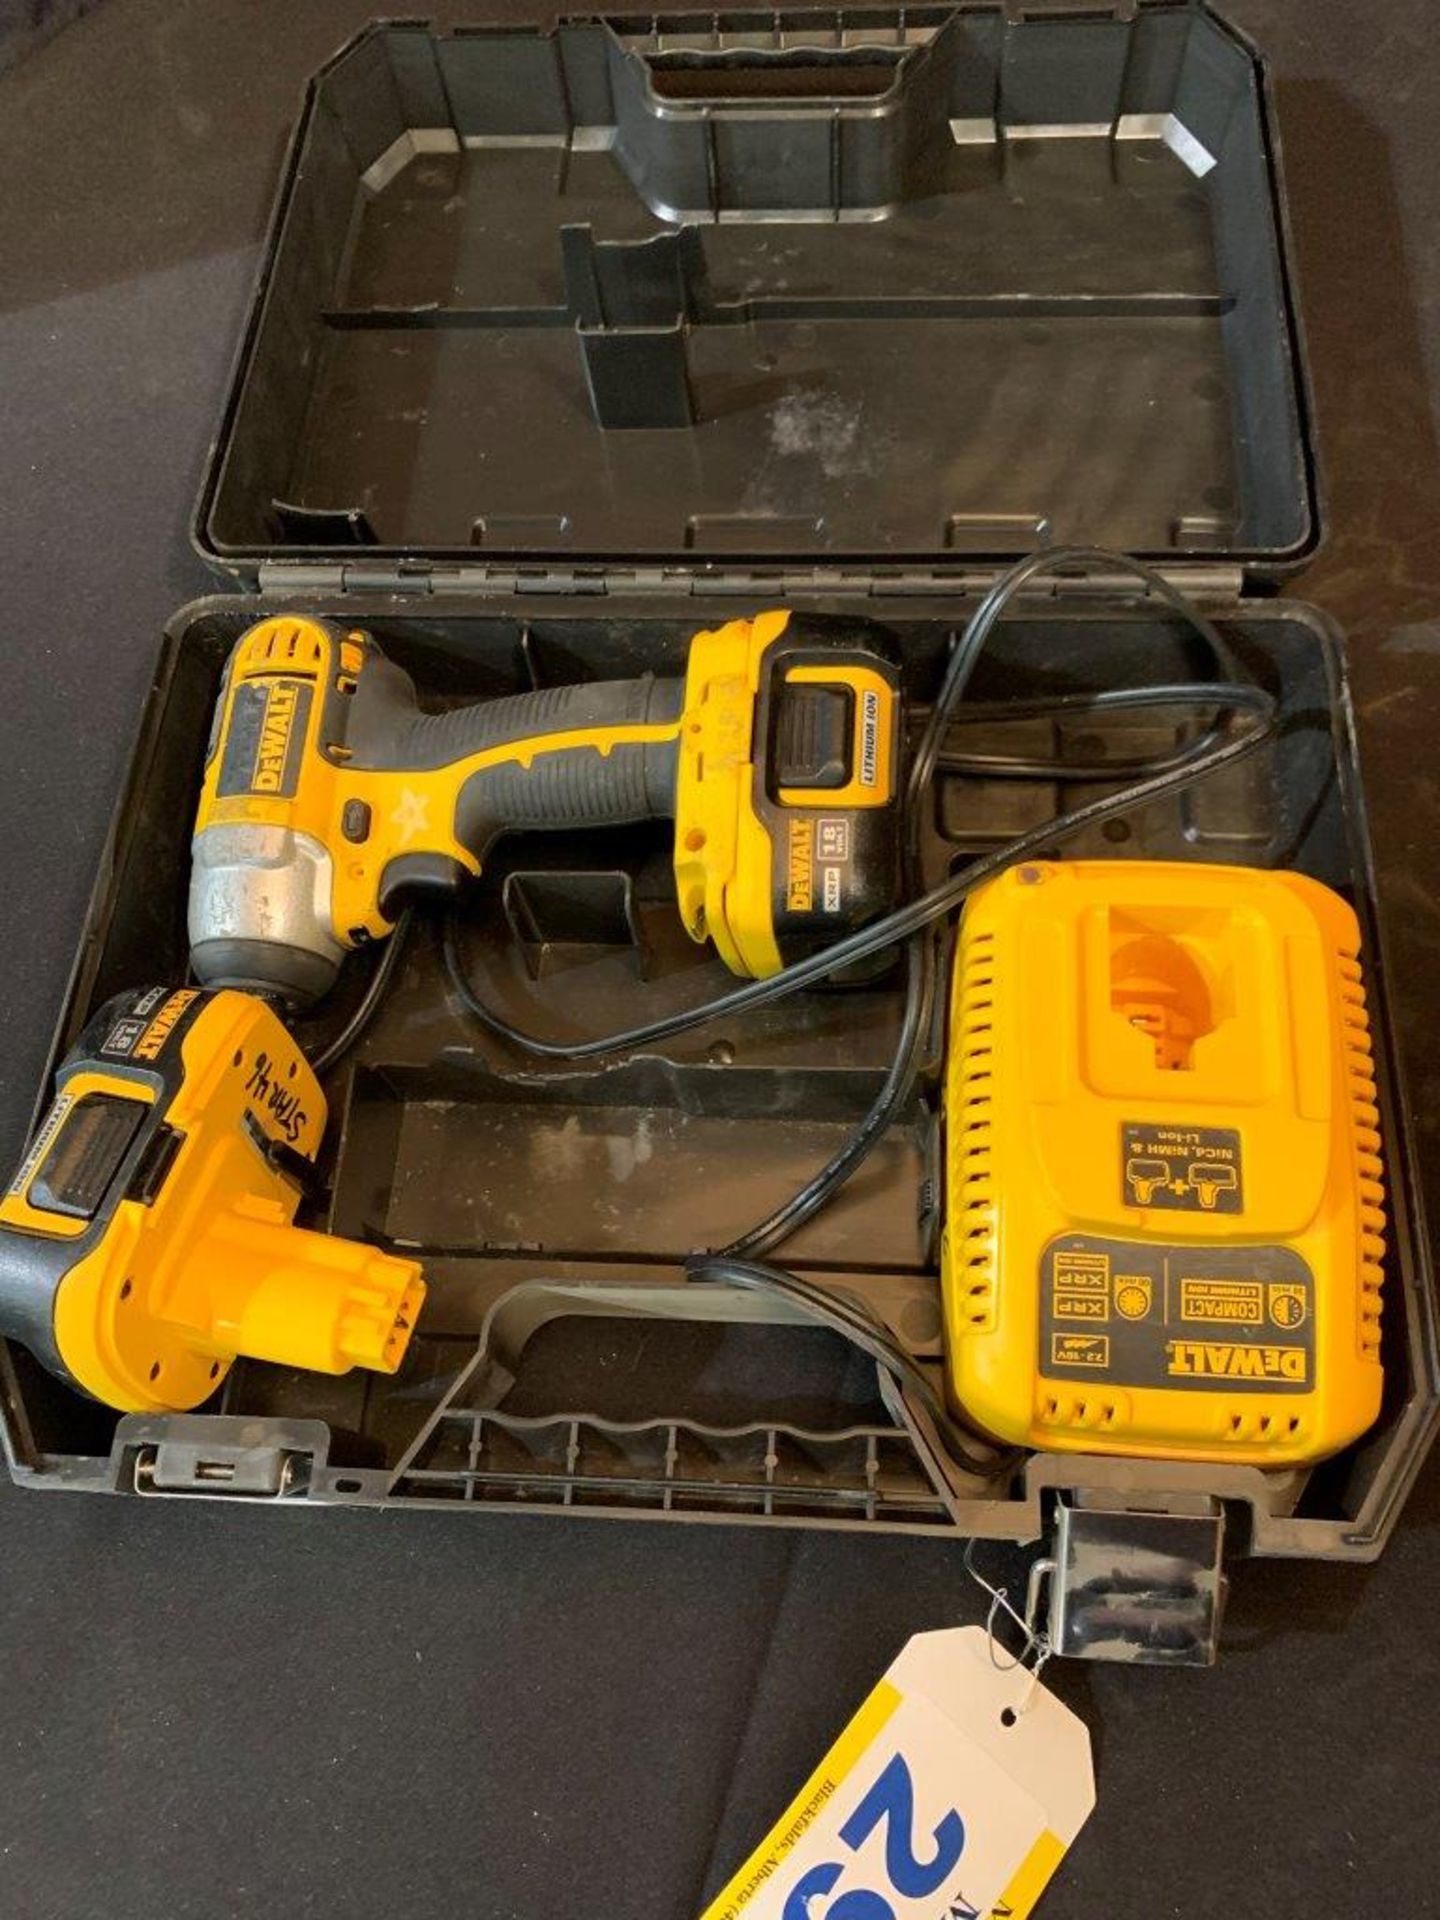 DEWALT 18V XRP CORDLESS IMPACT DRIVER W/ 2-BATTERIES AND CHARGER